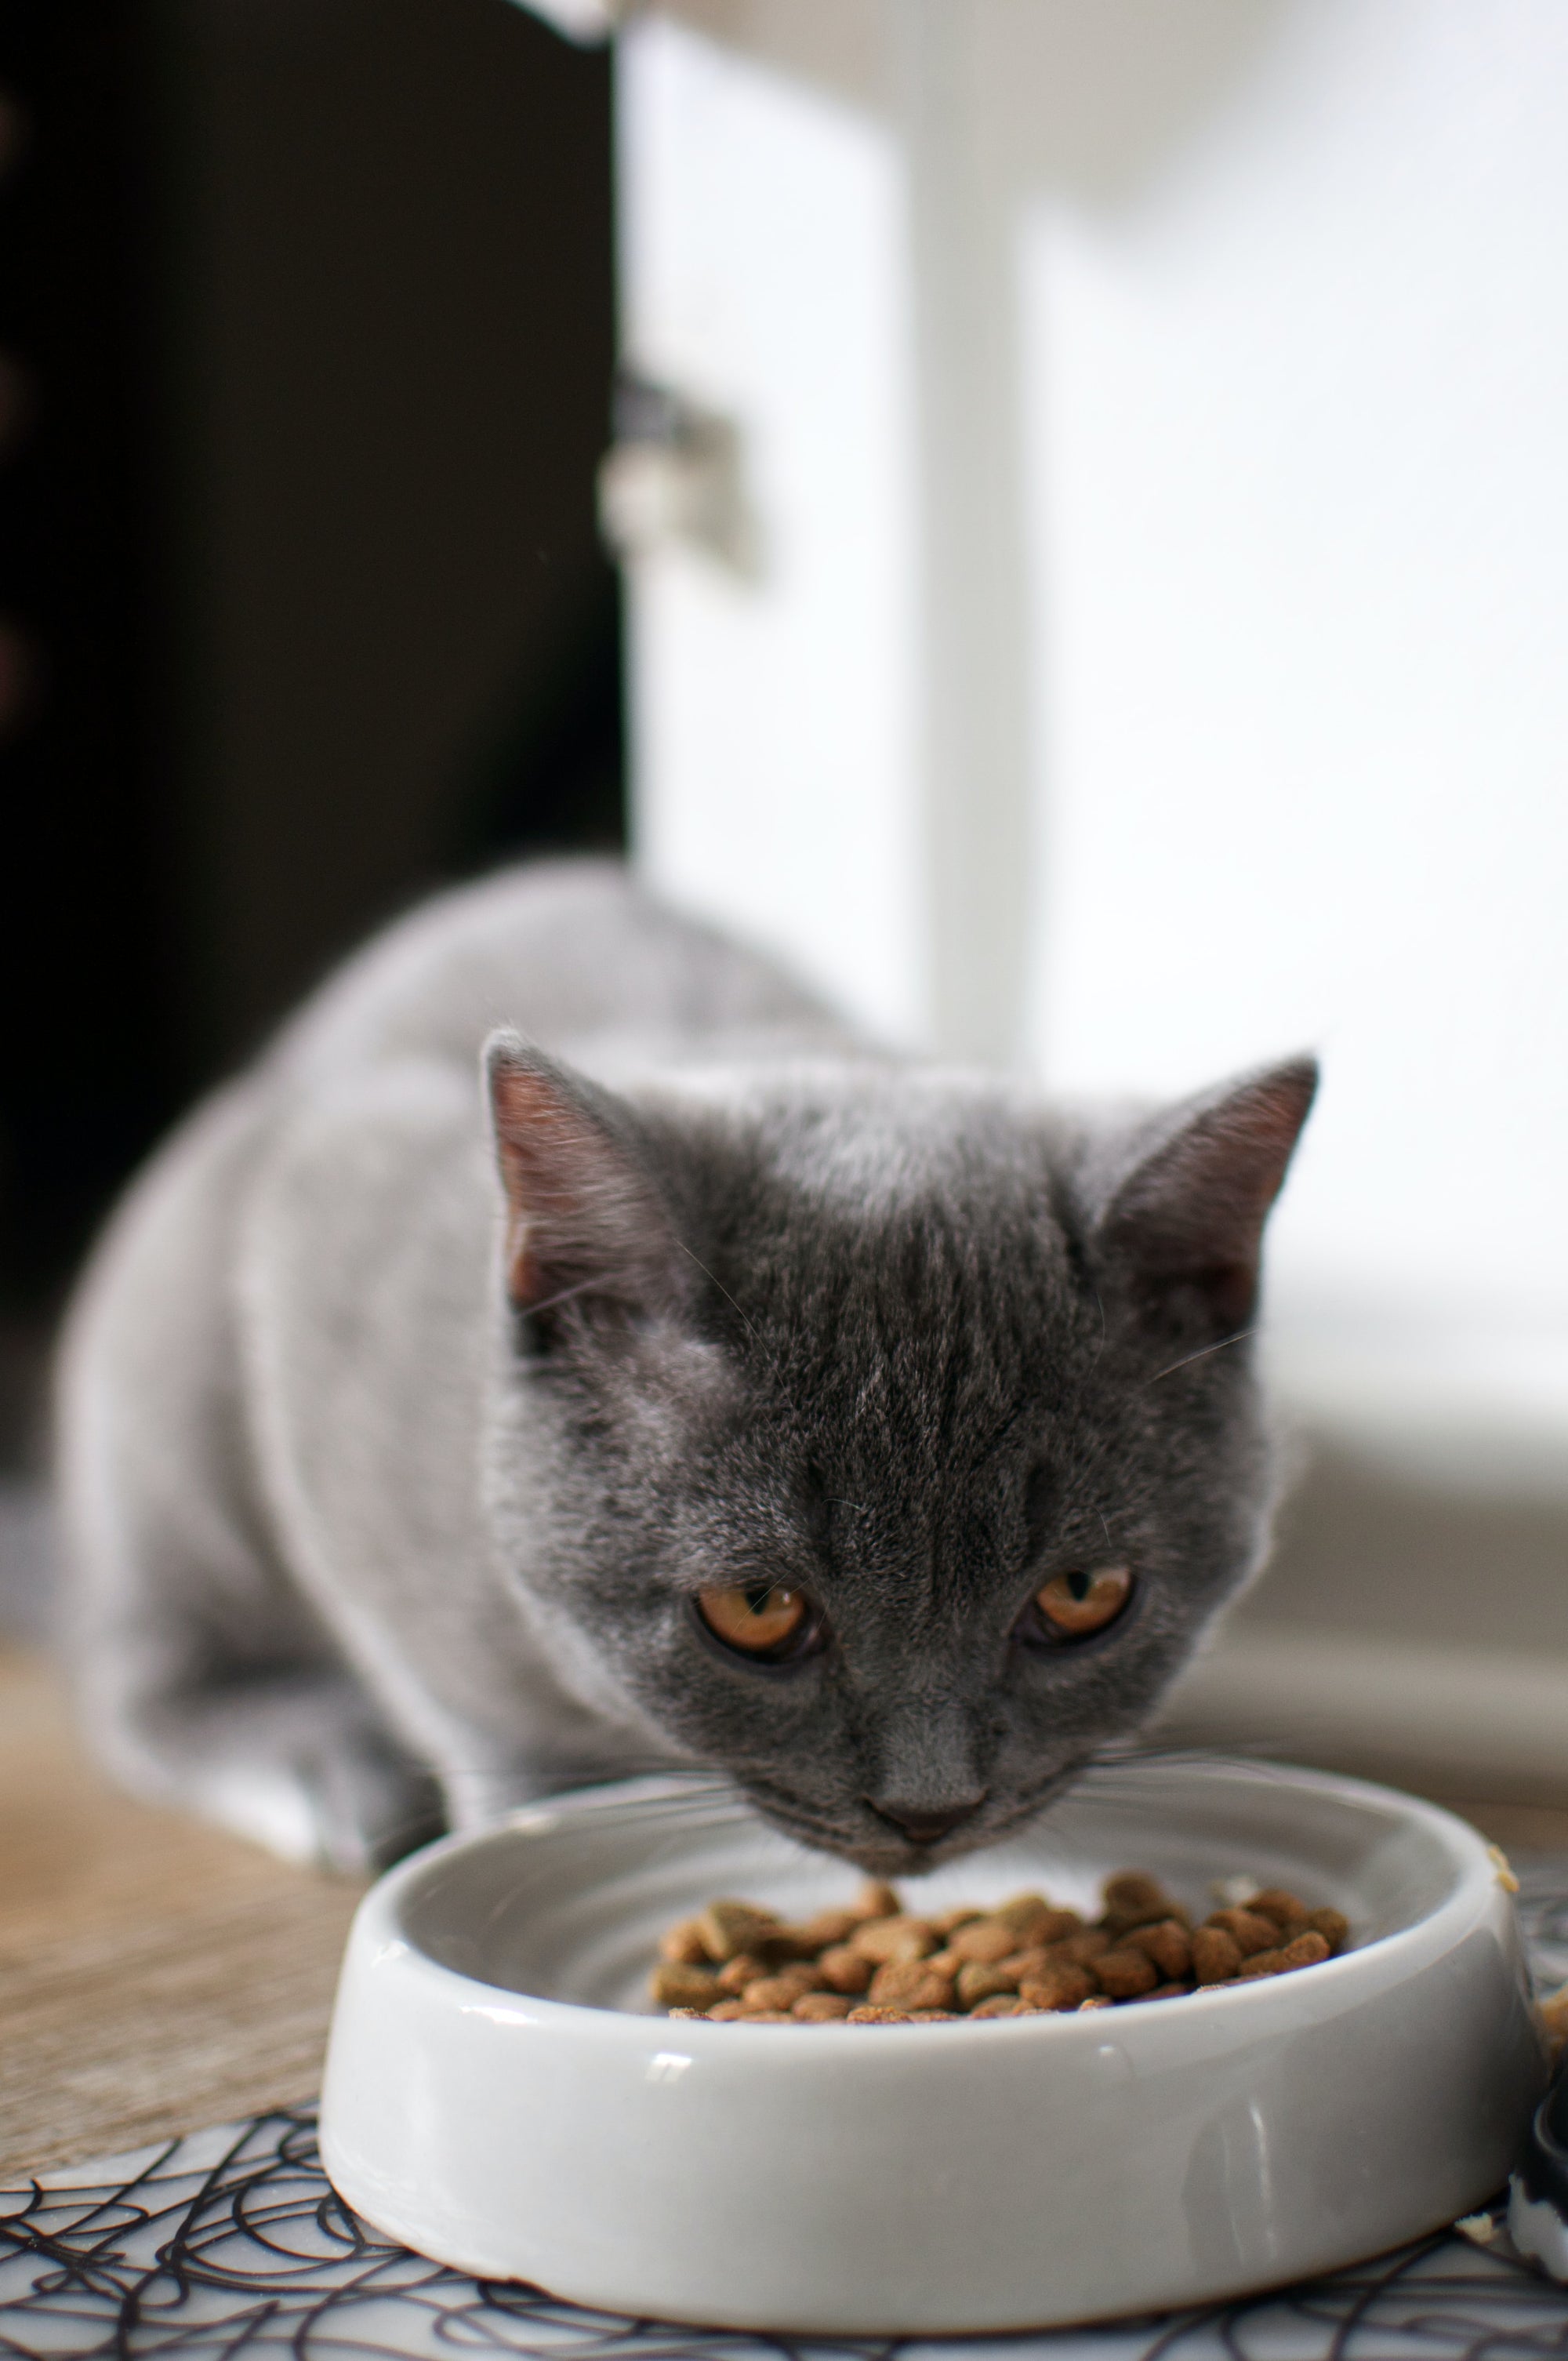 Omega Fatty Acids and their role in the diet of the cat